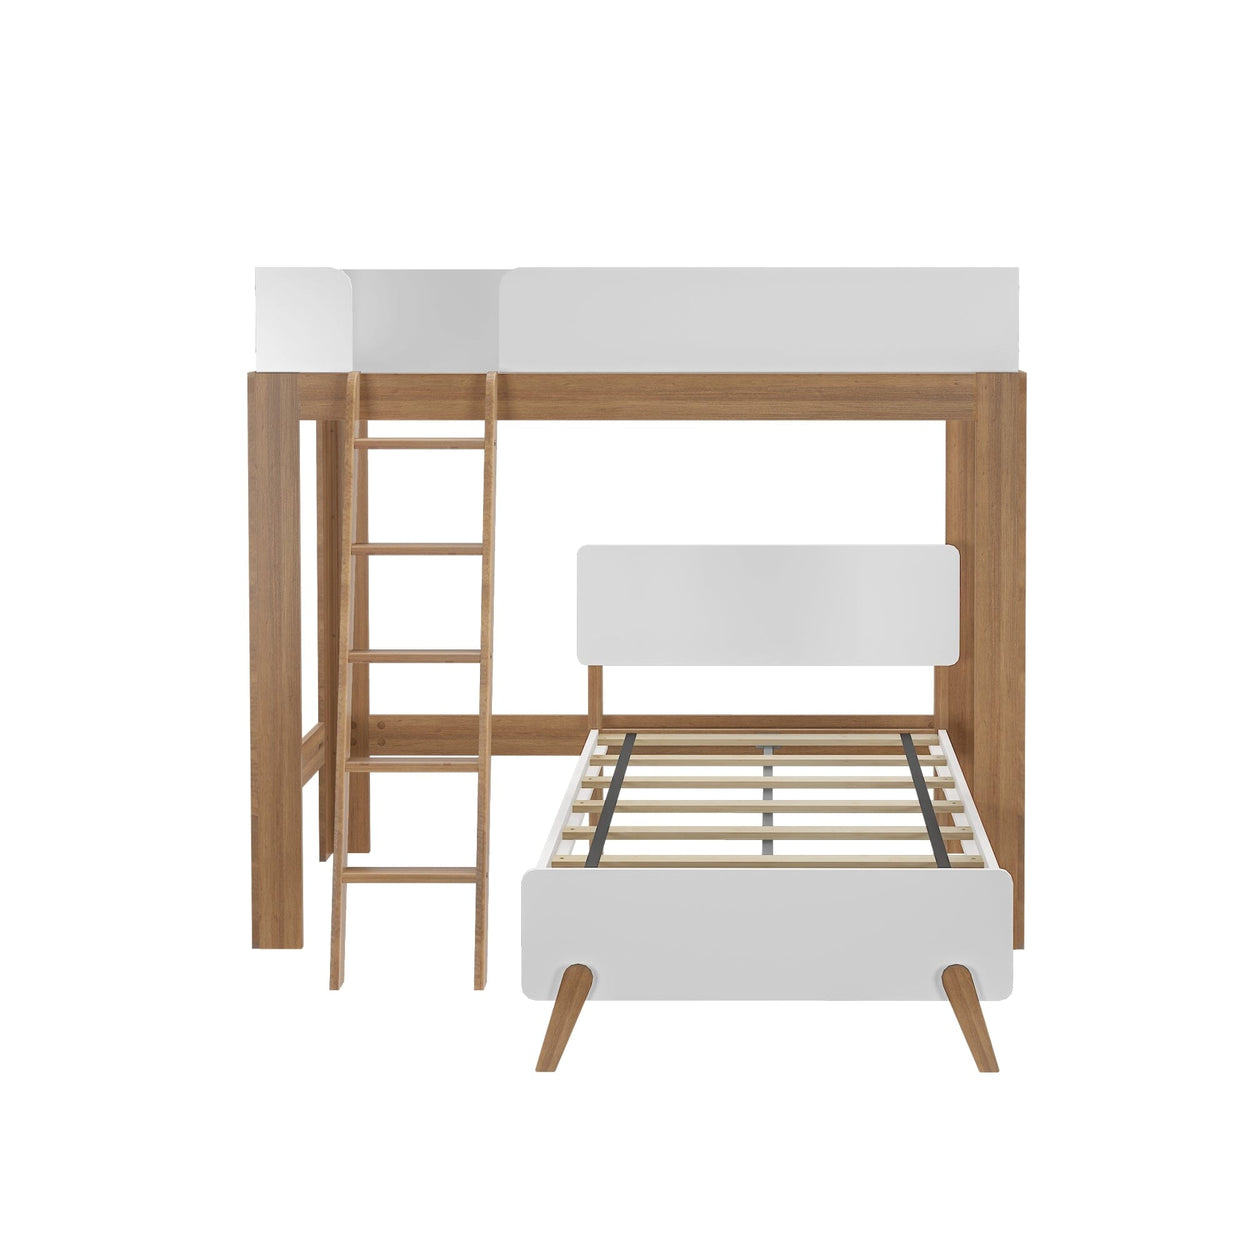 20-811-527 : Bunk Beds Mid-Century Modern L-Shaped Twin over Twin Bunk Bed, Pecan and White